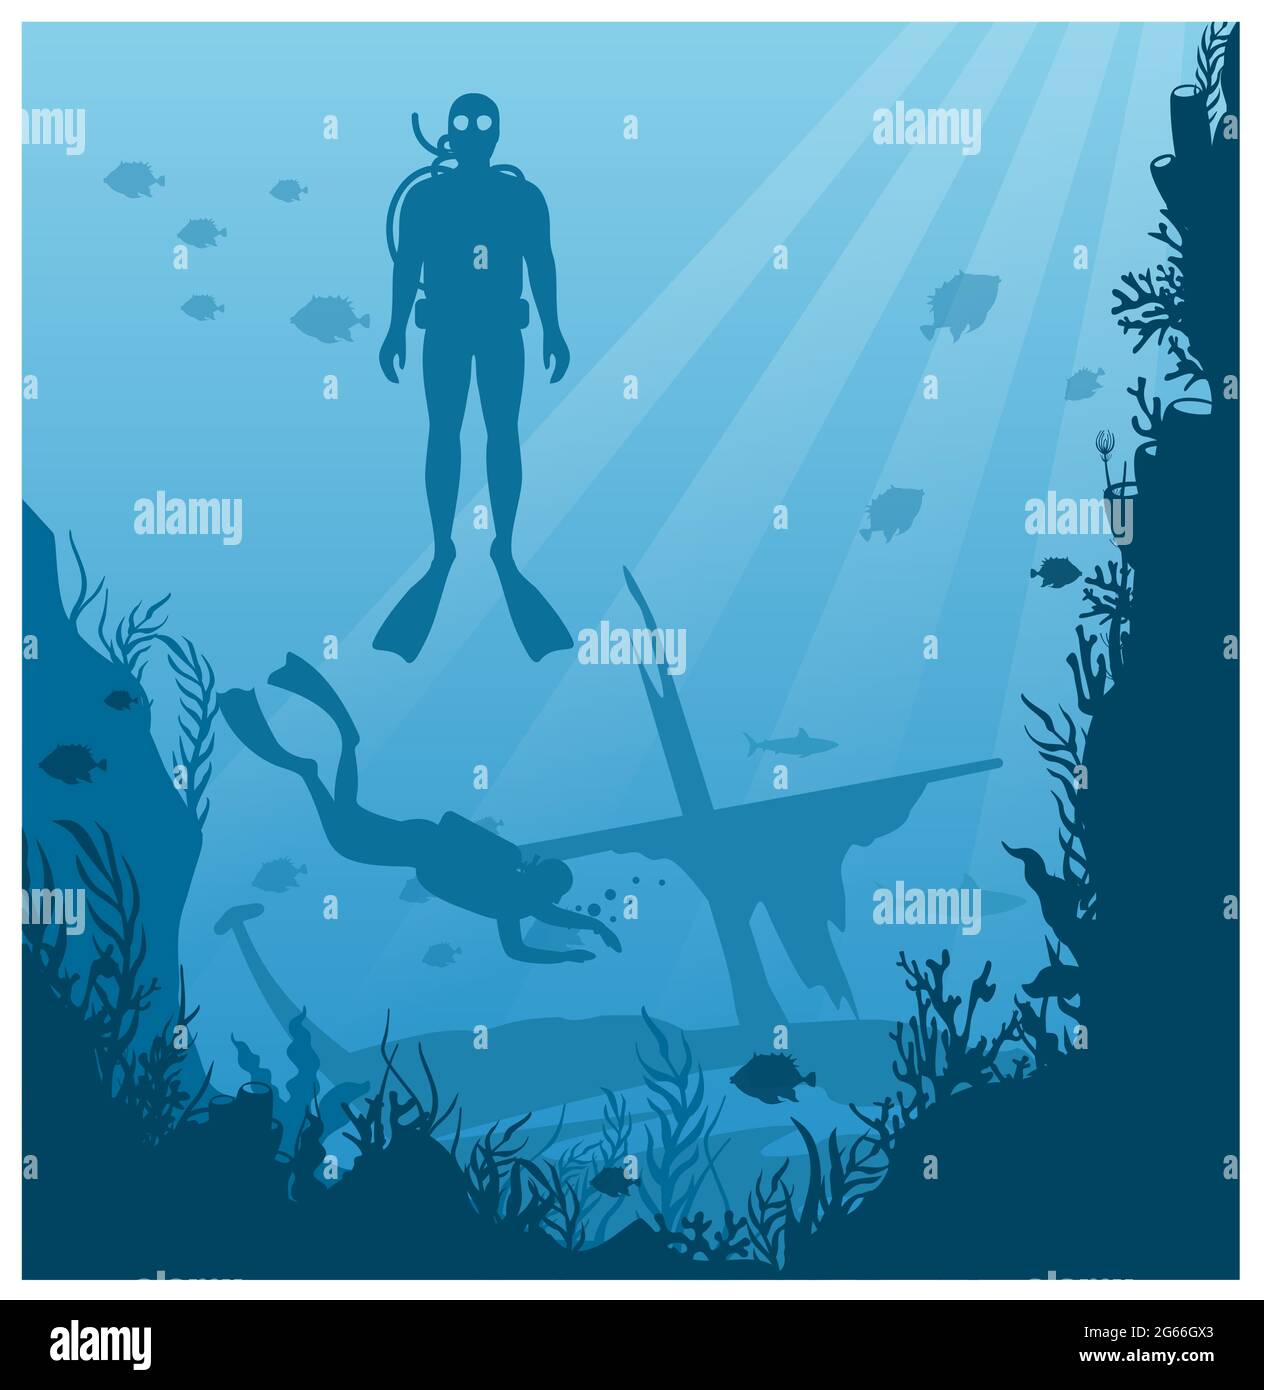 Scuba diving, snorkeling flat vector illustration. Diving concept. Diver in swimsuit with flippers silhouette. Underwater activity, marine adventure Stock Vector